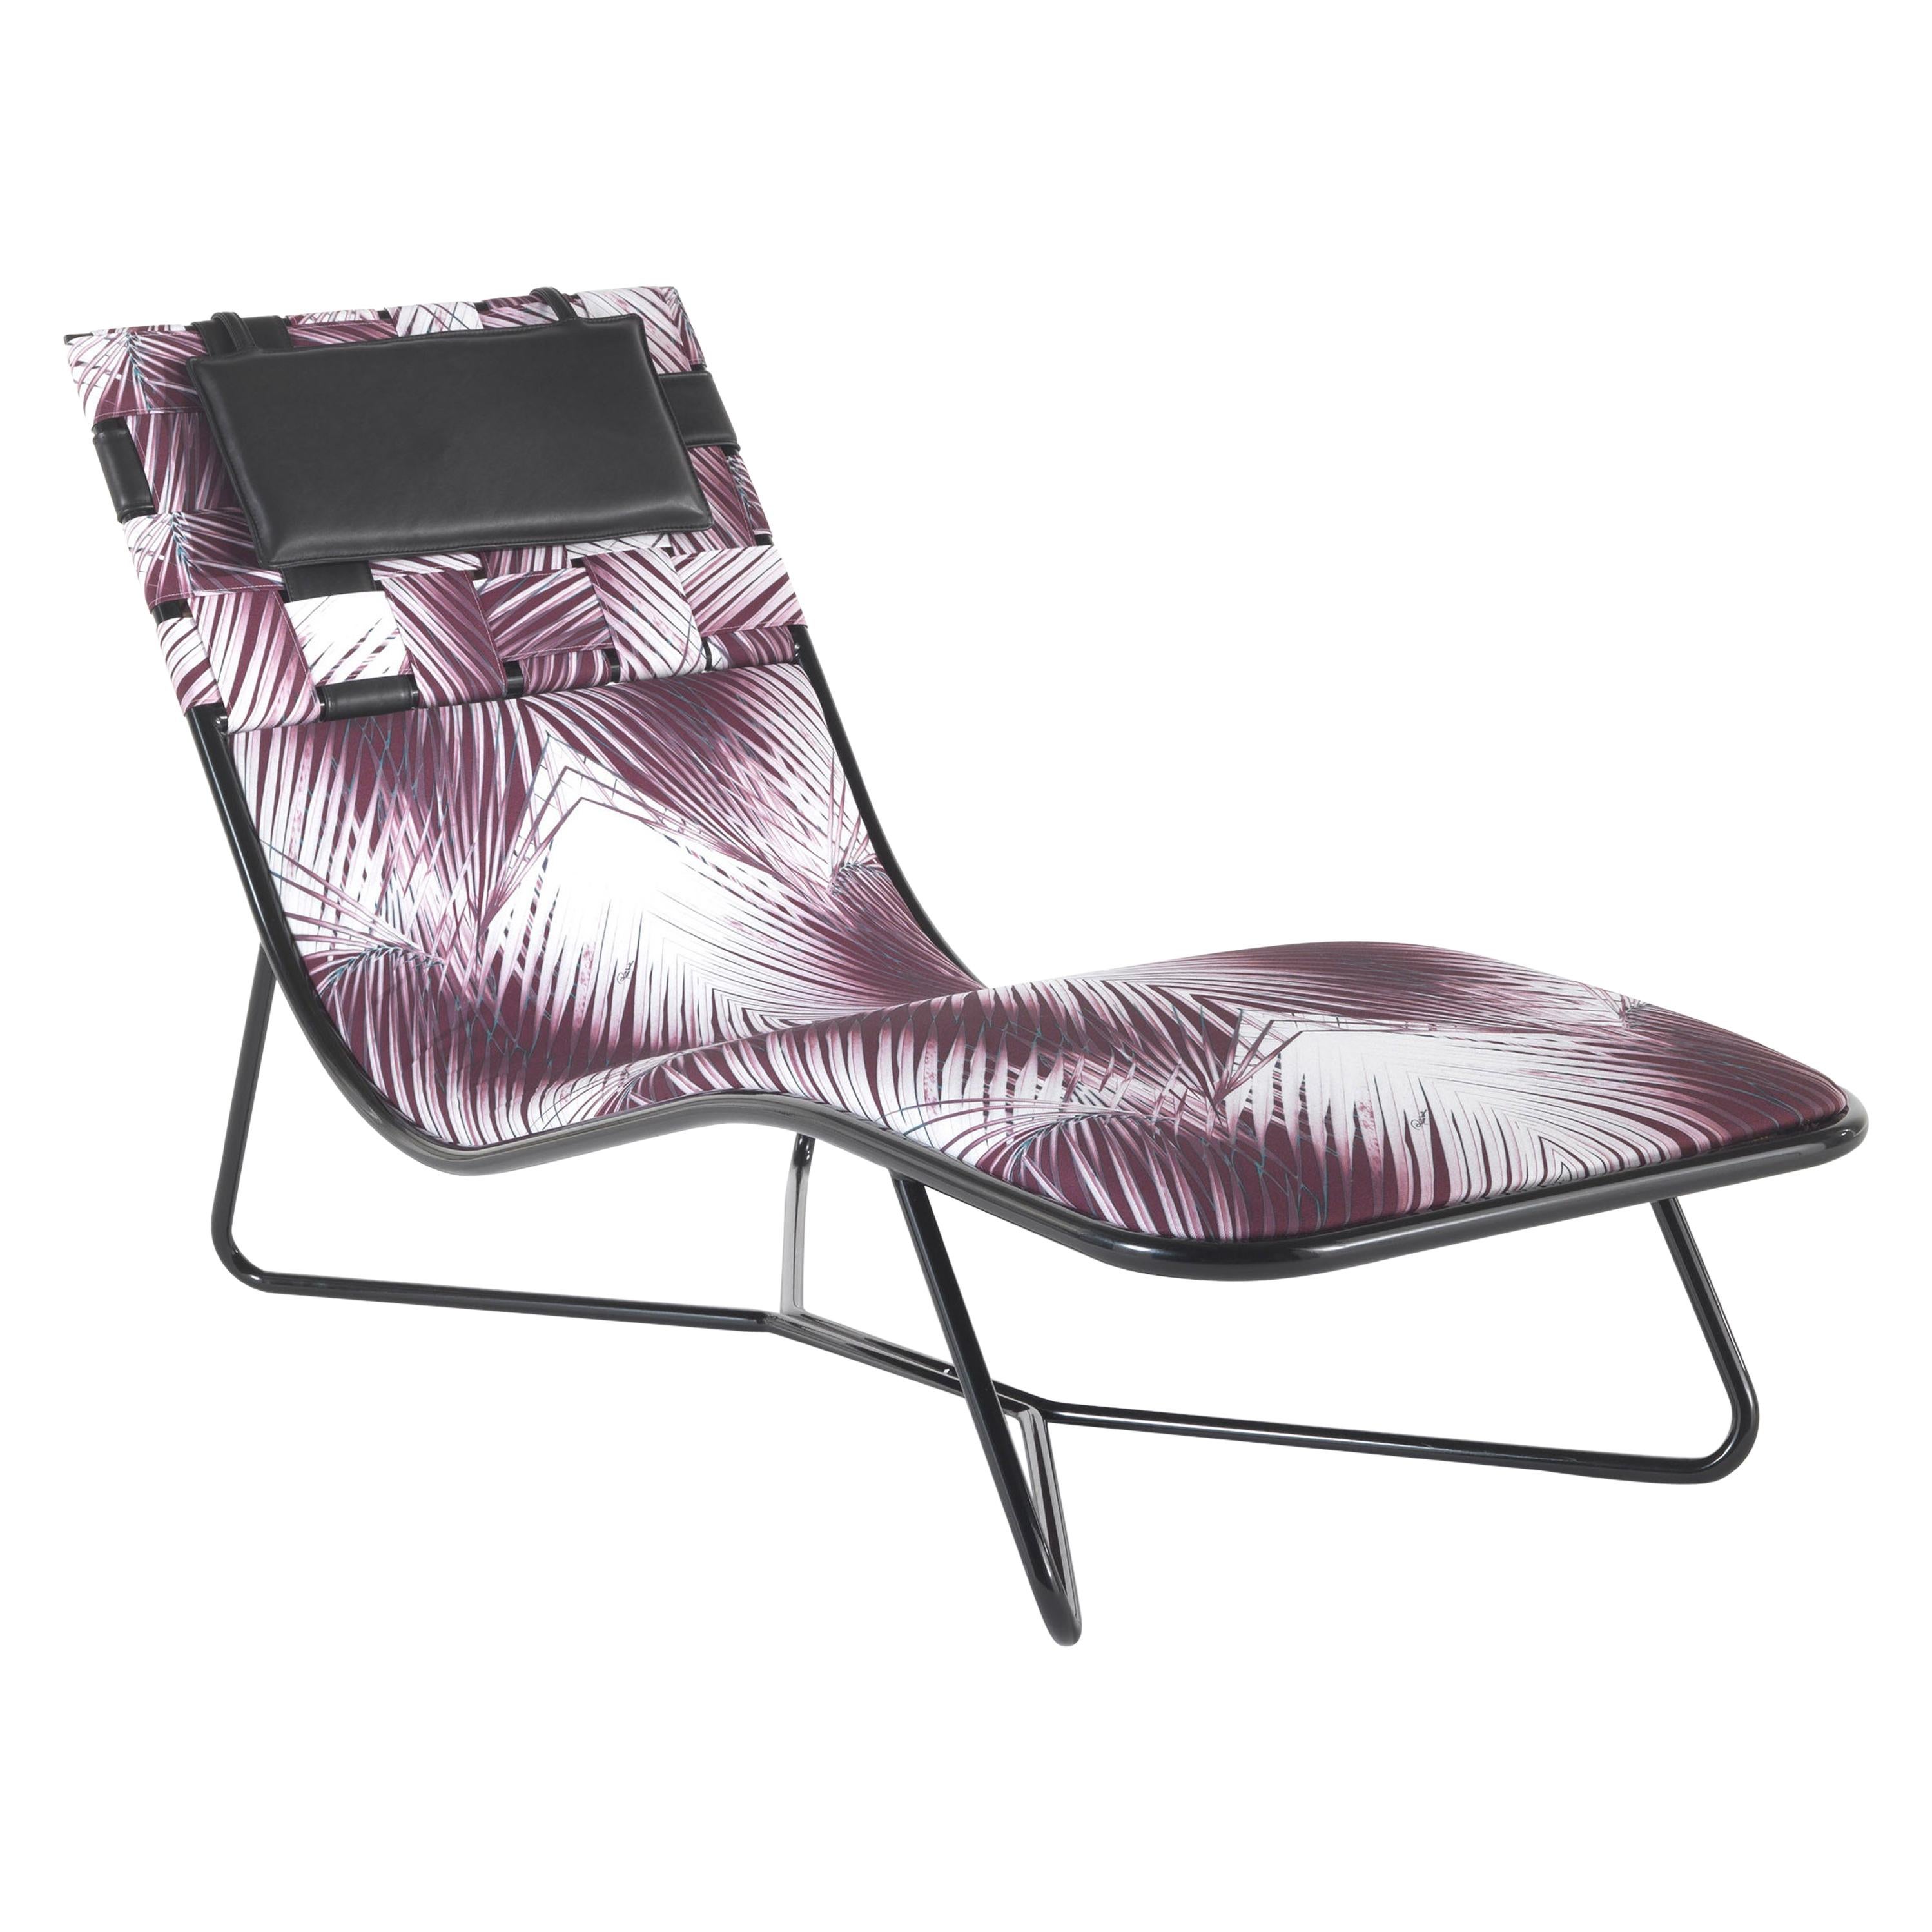 Papeete Outdoor chaise-longue in metal frame in outdoor finishing col. Black. Outdoor fabric cat. A. Jungle and black leather. Structure outdoor. Additional decorative cushions upon request.
  